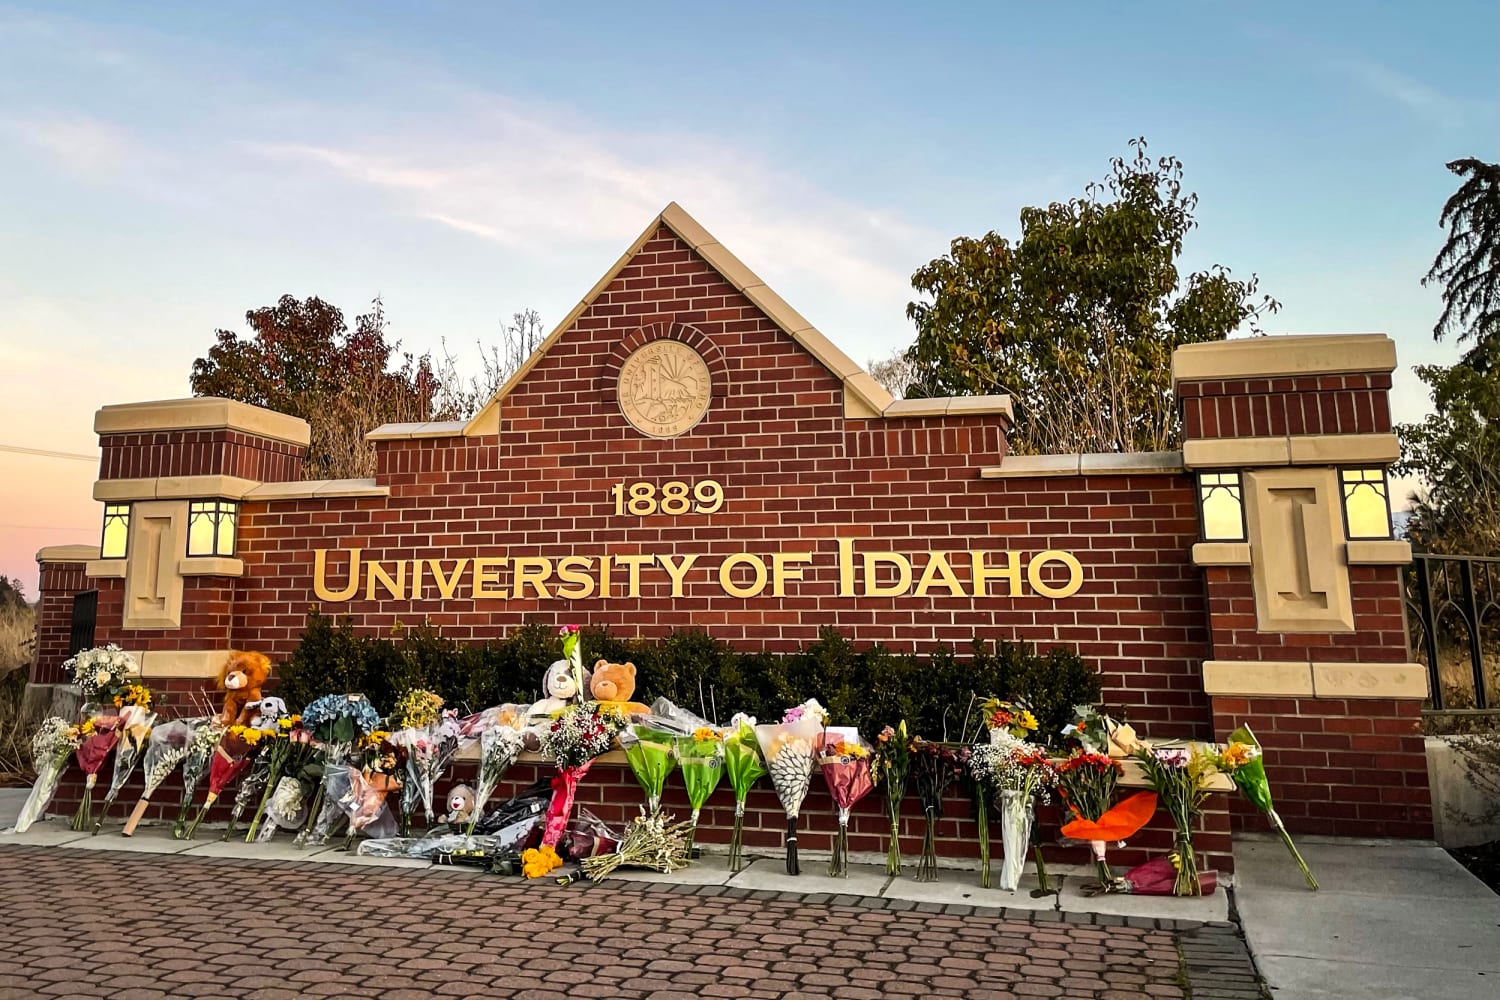 Idaho student murders: University to have 'increased security' for final  weeks of semester